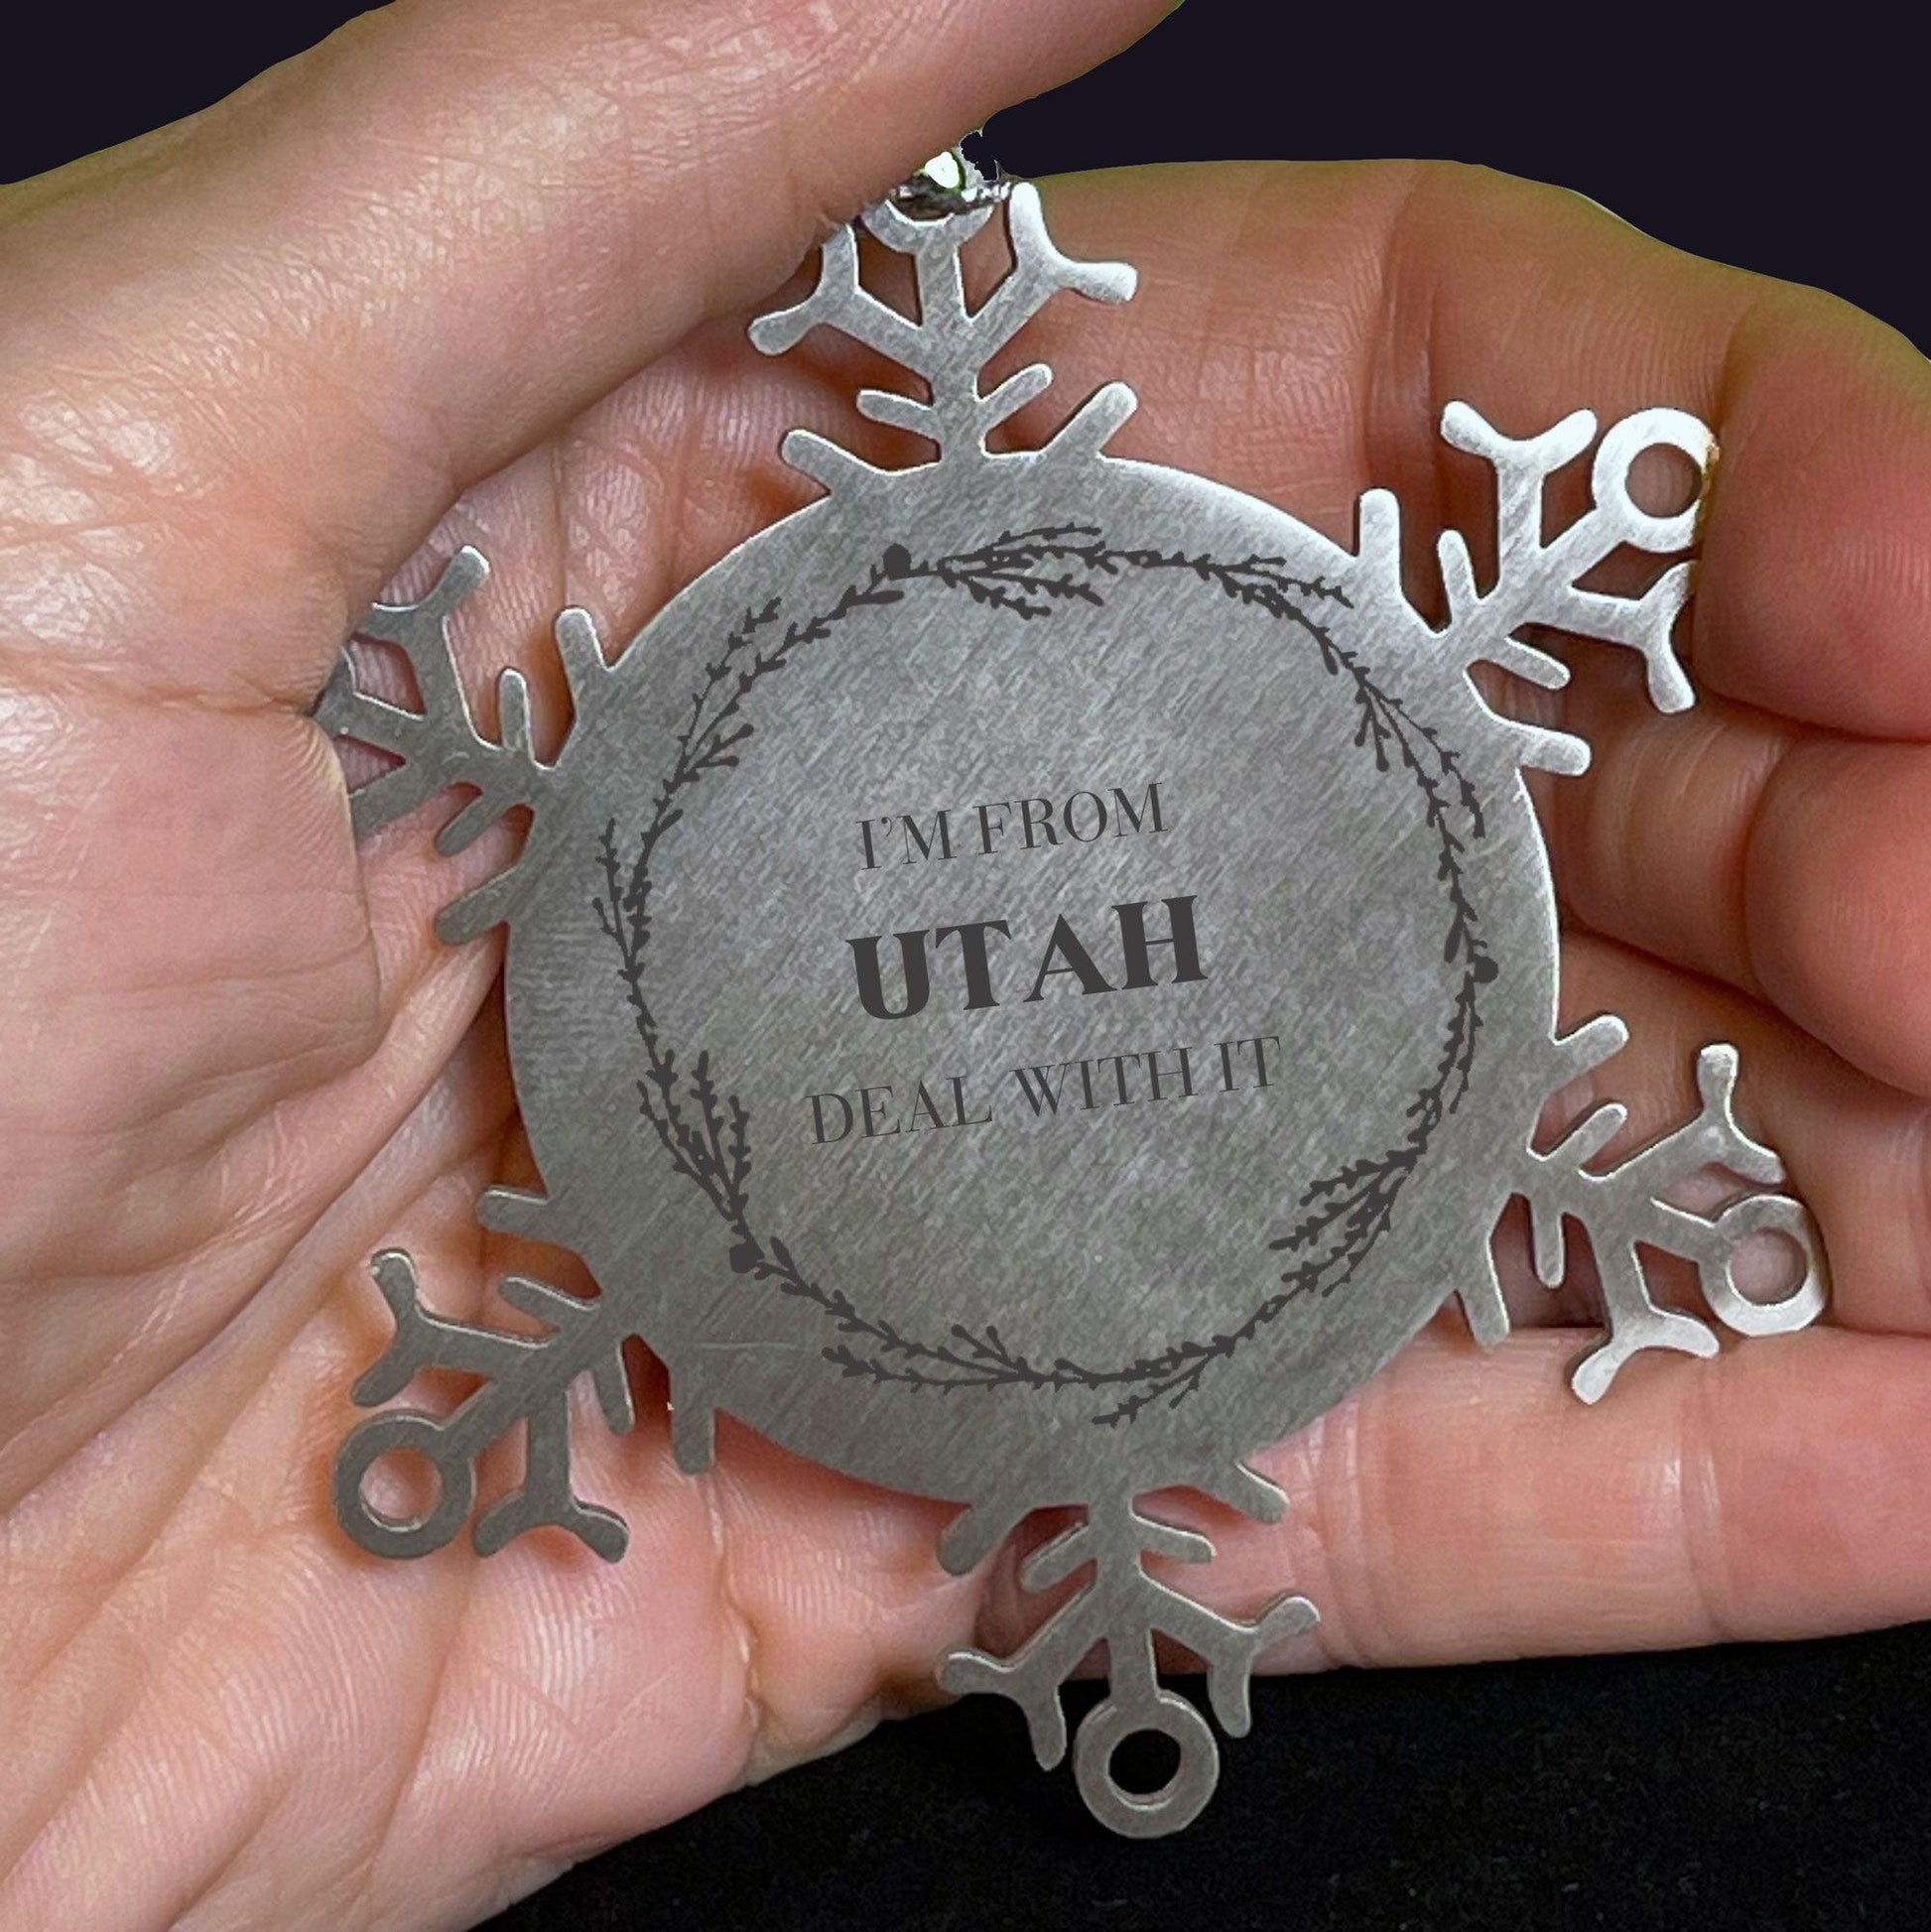 I'm from Utah, Deal with it, Proud Utah State Ornament Gifts, Utah Snowflake Ornament Gift Idea, Christmas Gifts for Utah People, Coworkers, Colleague - Mallard Moon Gift Shop